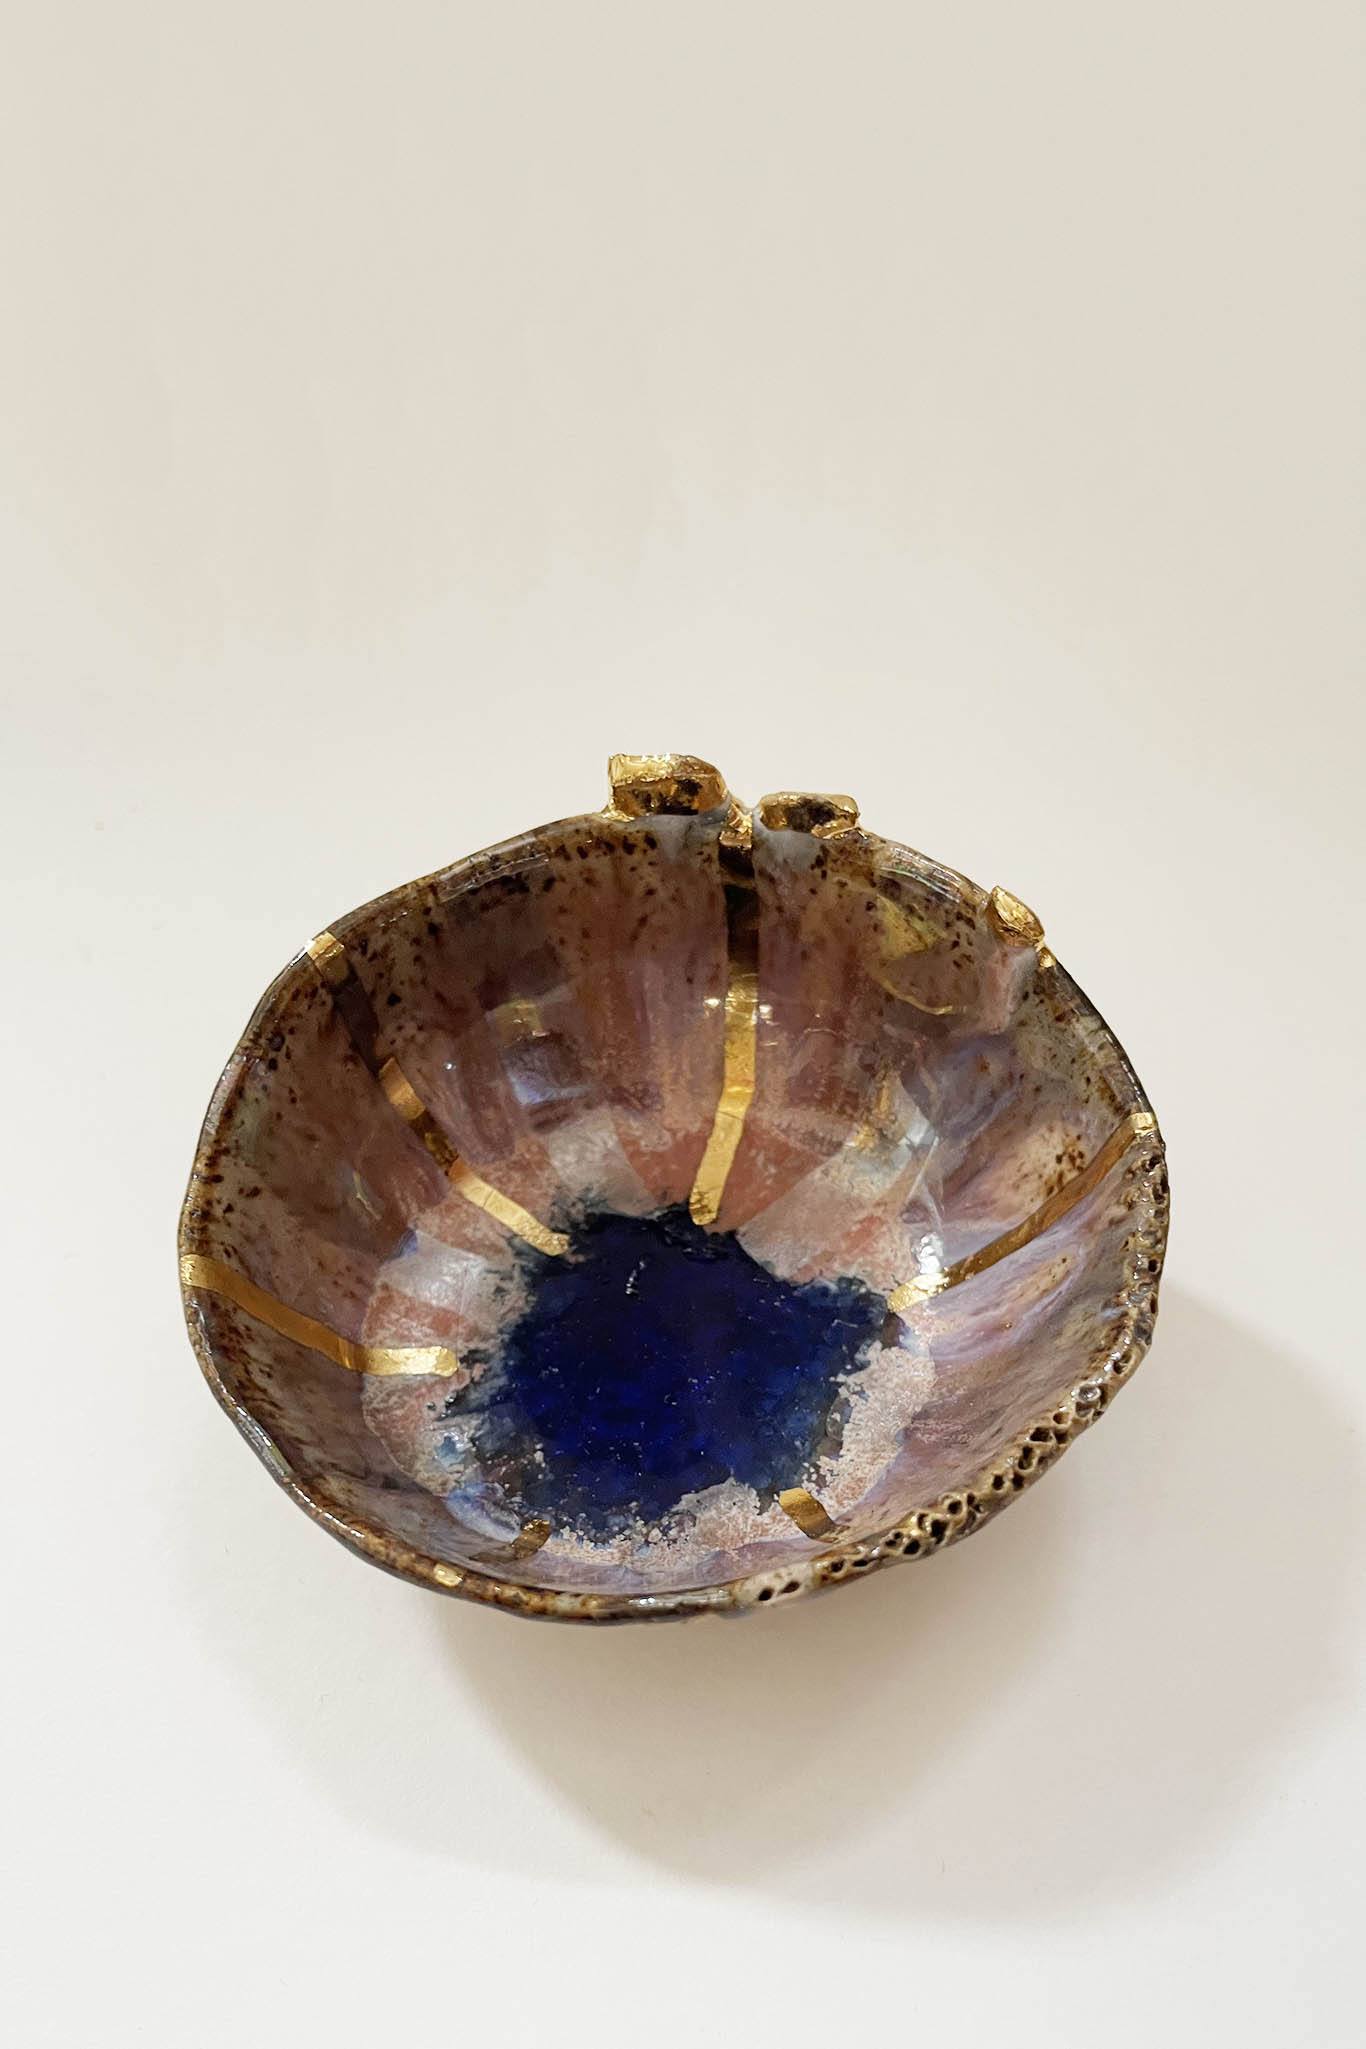 Minh Singer Mini Icelandic Dish with Gold and Cobalt Exterior - Blue Lagoon